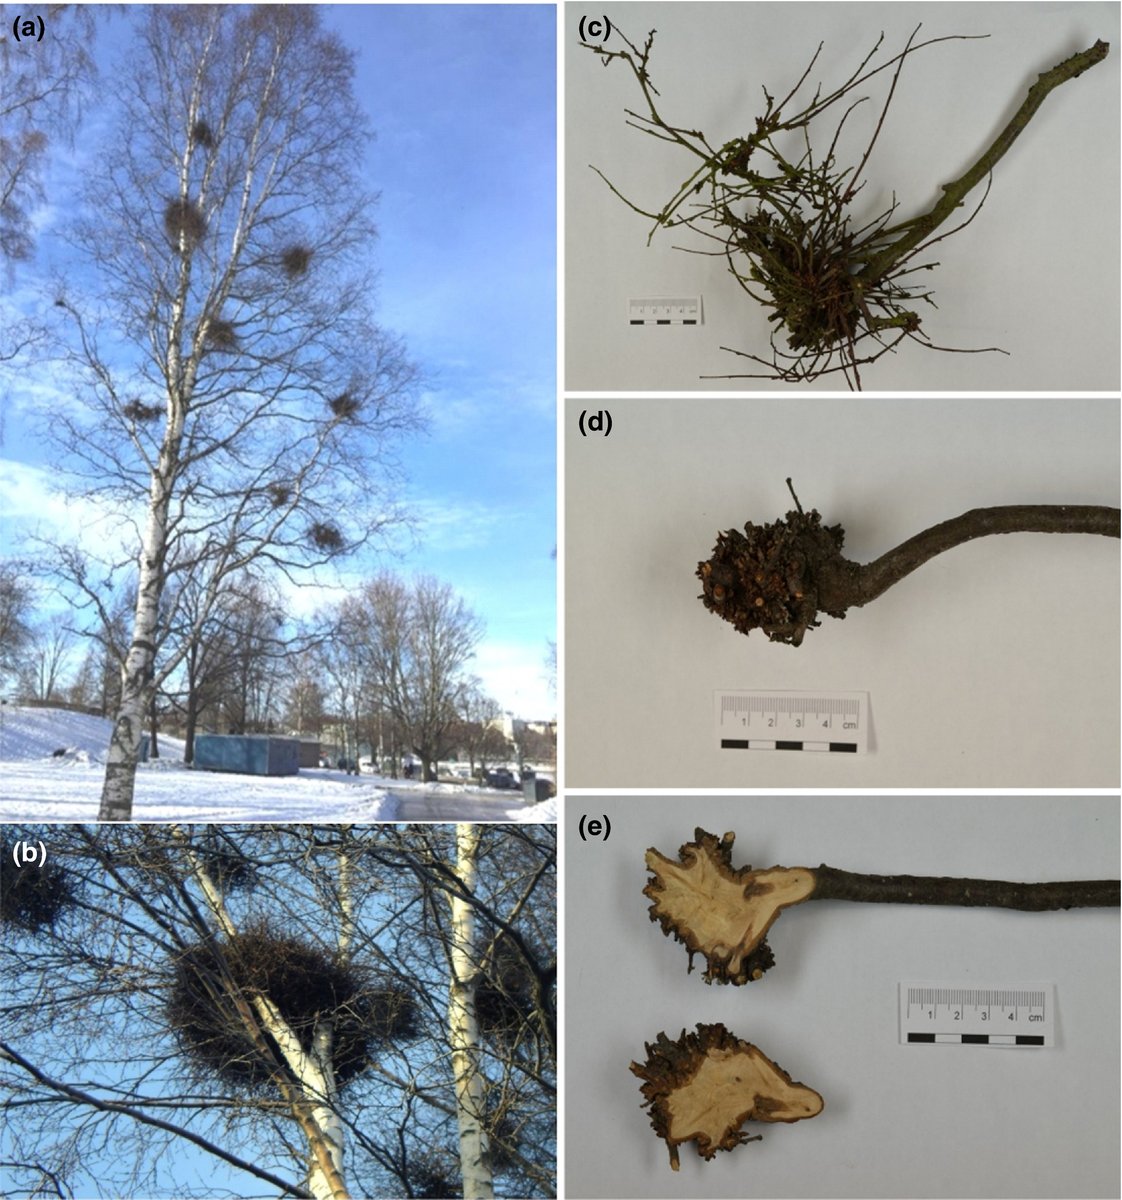 Congrats to Margaretta Christita on her paper: 
Genetic resistance and tumour morphology in birch infected with Taphrina betulina.
https://t.co/PJdsAokyCi  @viikki_plants @OEB_Helsinki @helsinkiuni @wileyplantsci 
funded by @LPDP_RI @MetsatSeura
 and @SuomenAkatemia. https://t.co/fpK42tjILd